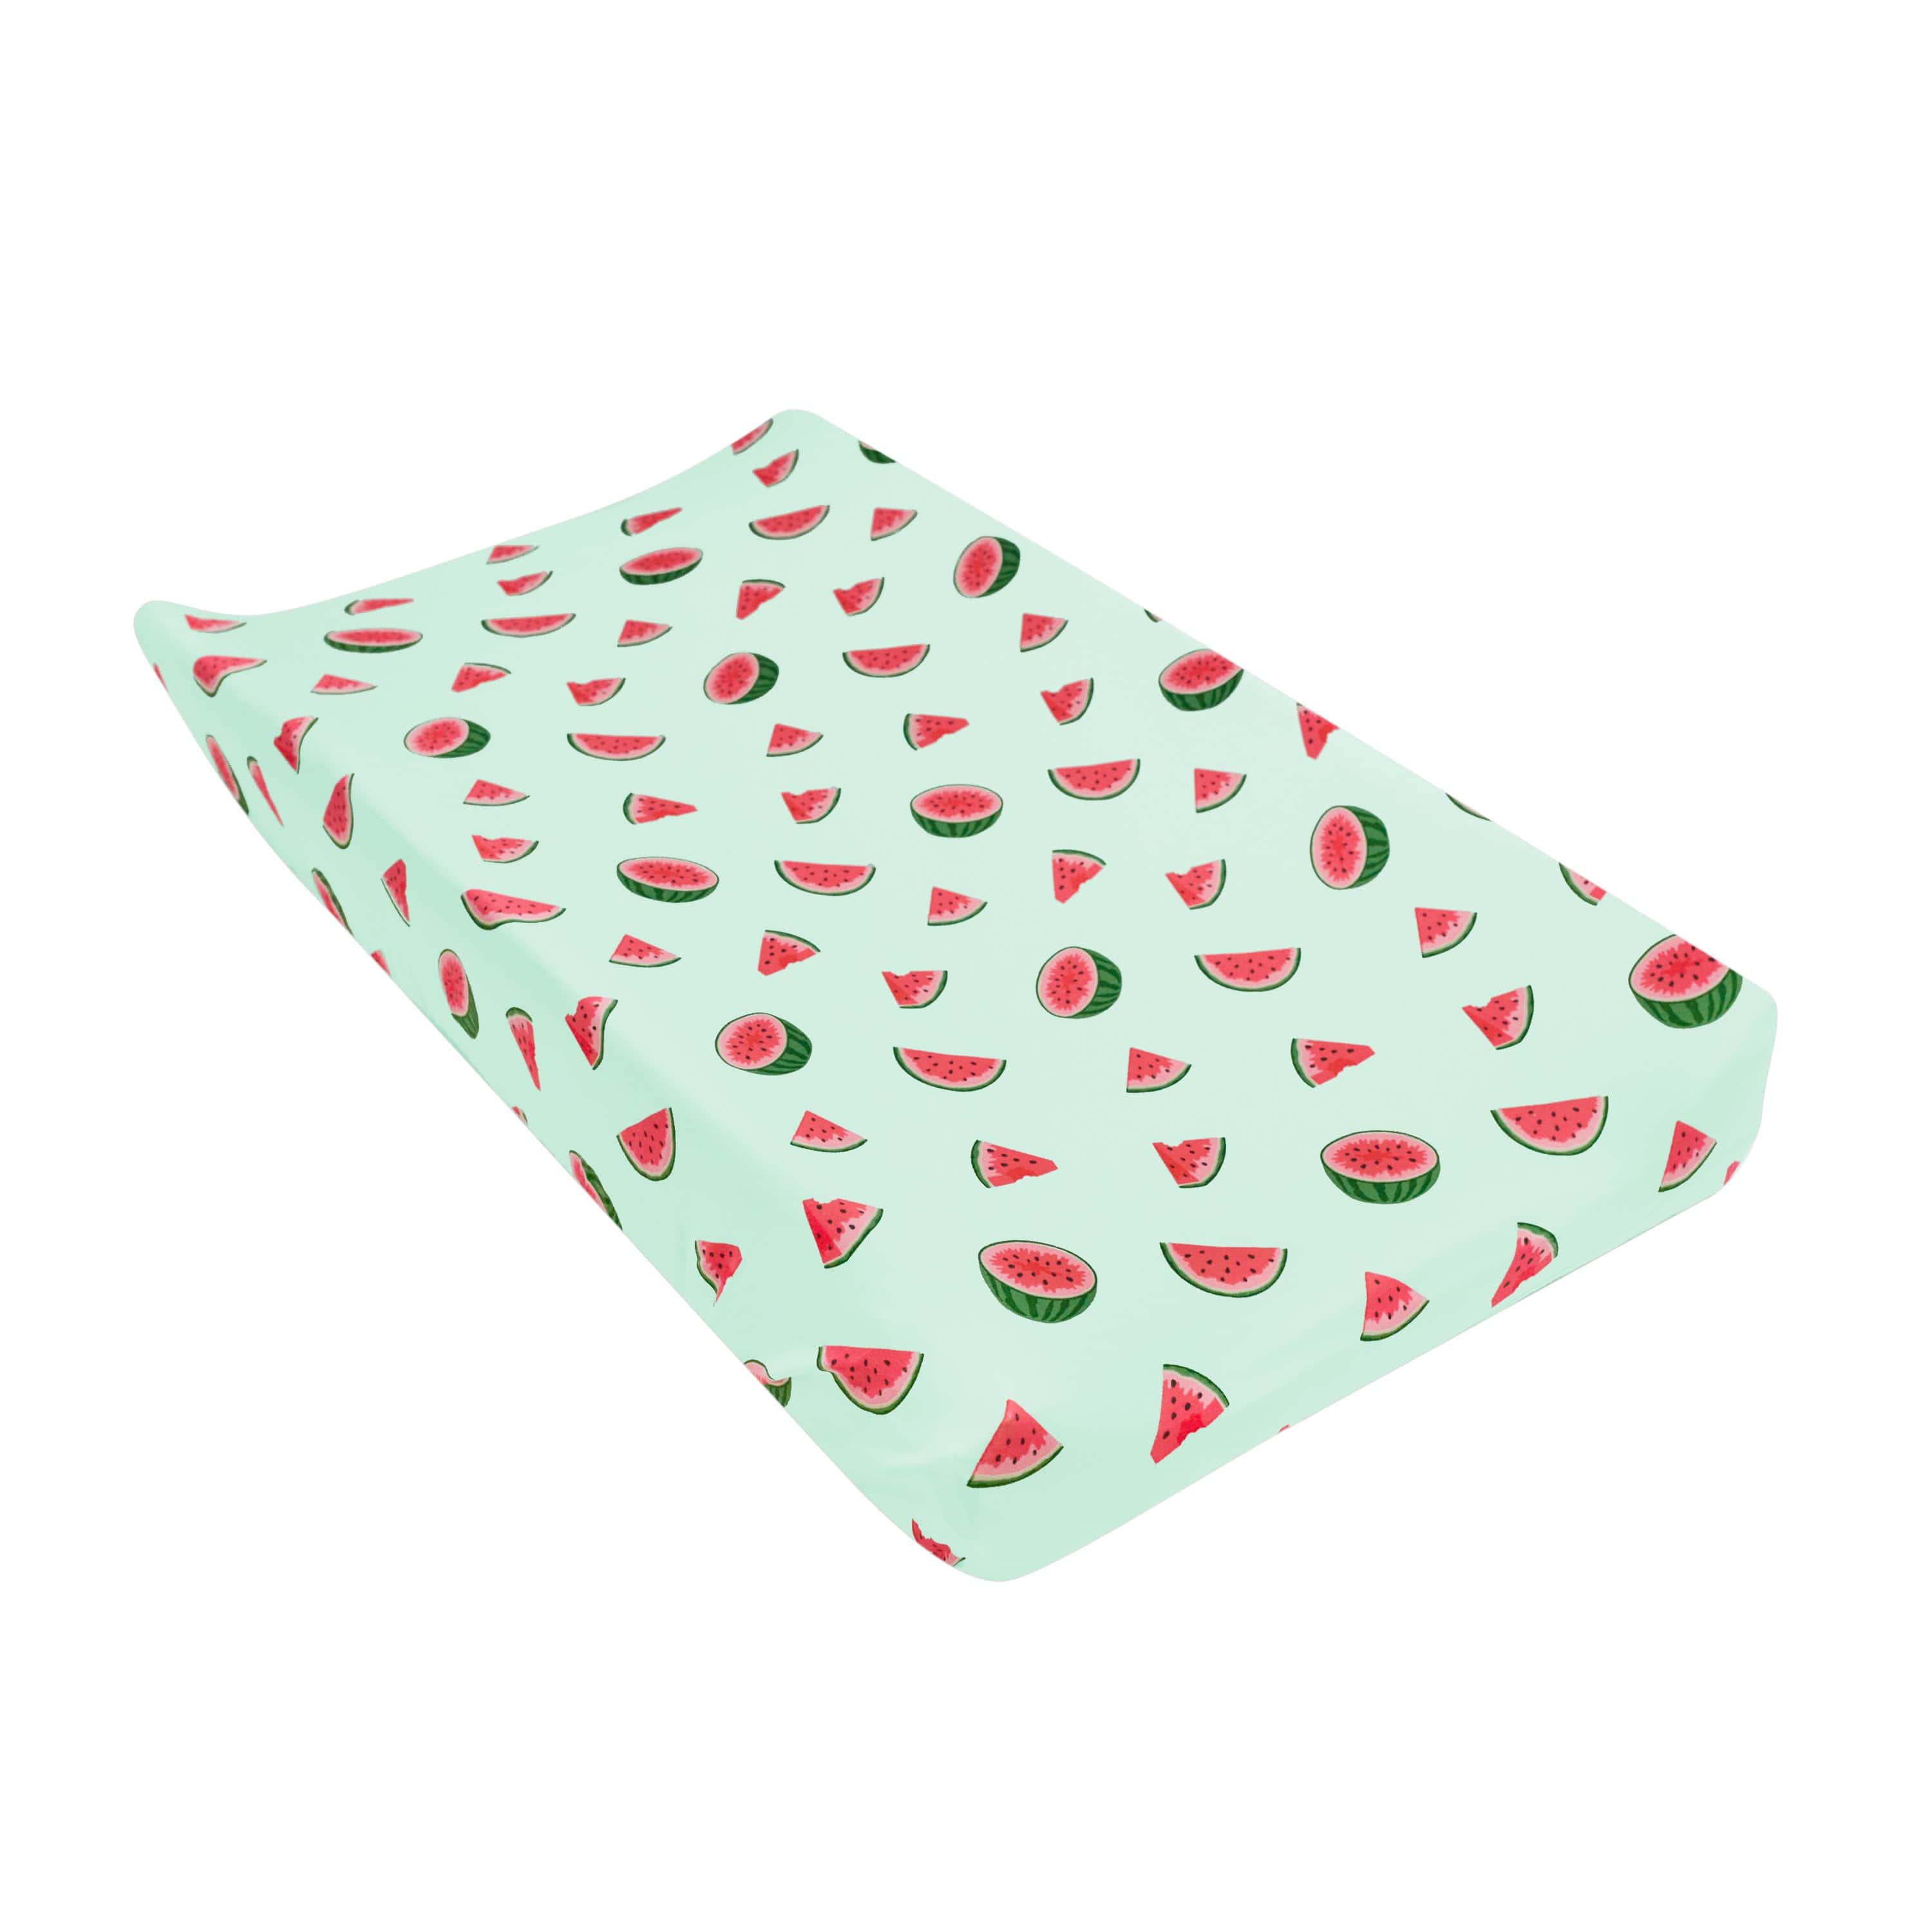 Kyte Baby Change Pad Cover Watermelon / One Size Change Pad Cover in Watermelon